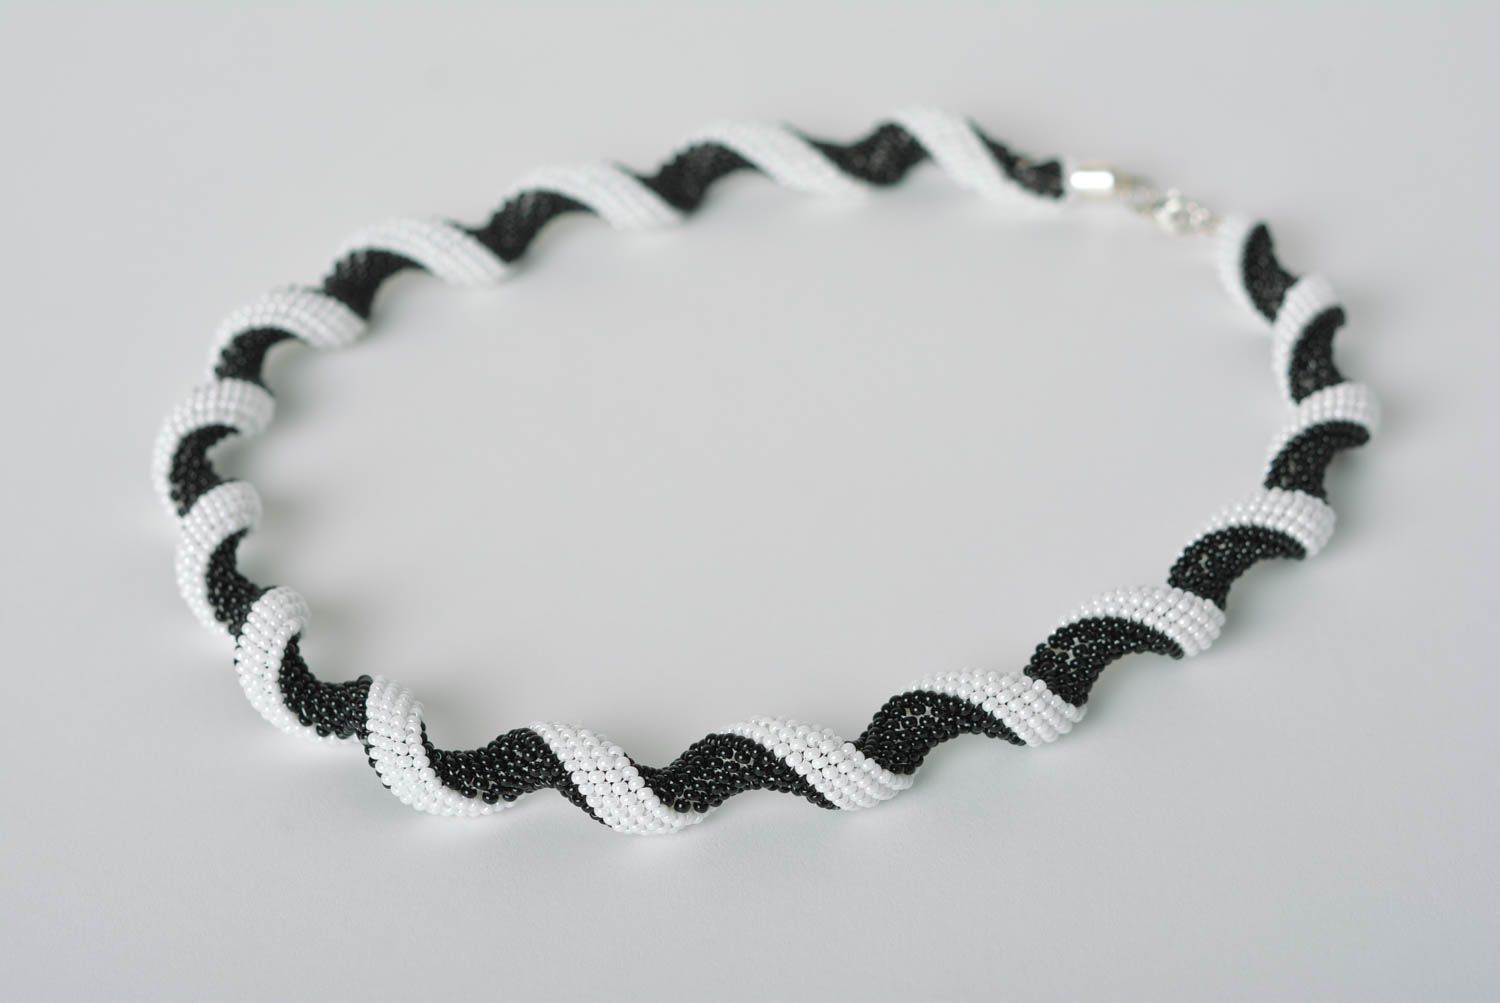 Beaded necklace handmade jewelry black and white beaded necklace gift idea  photo 1